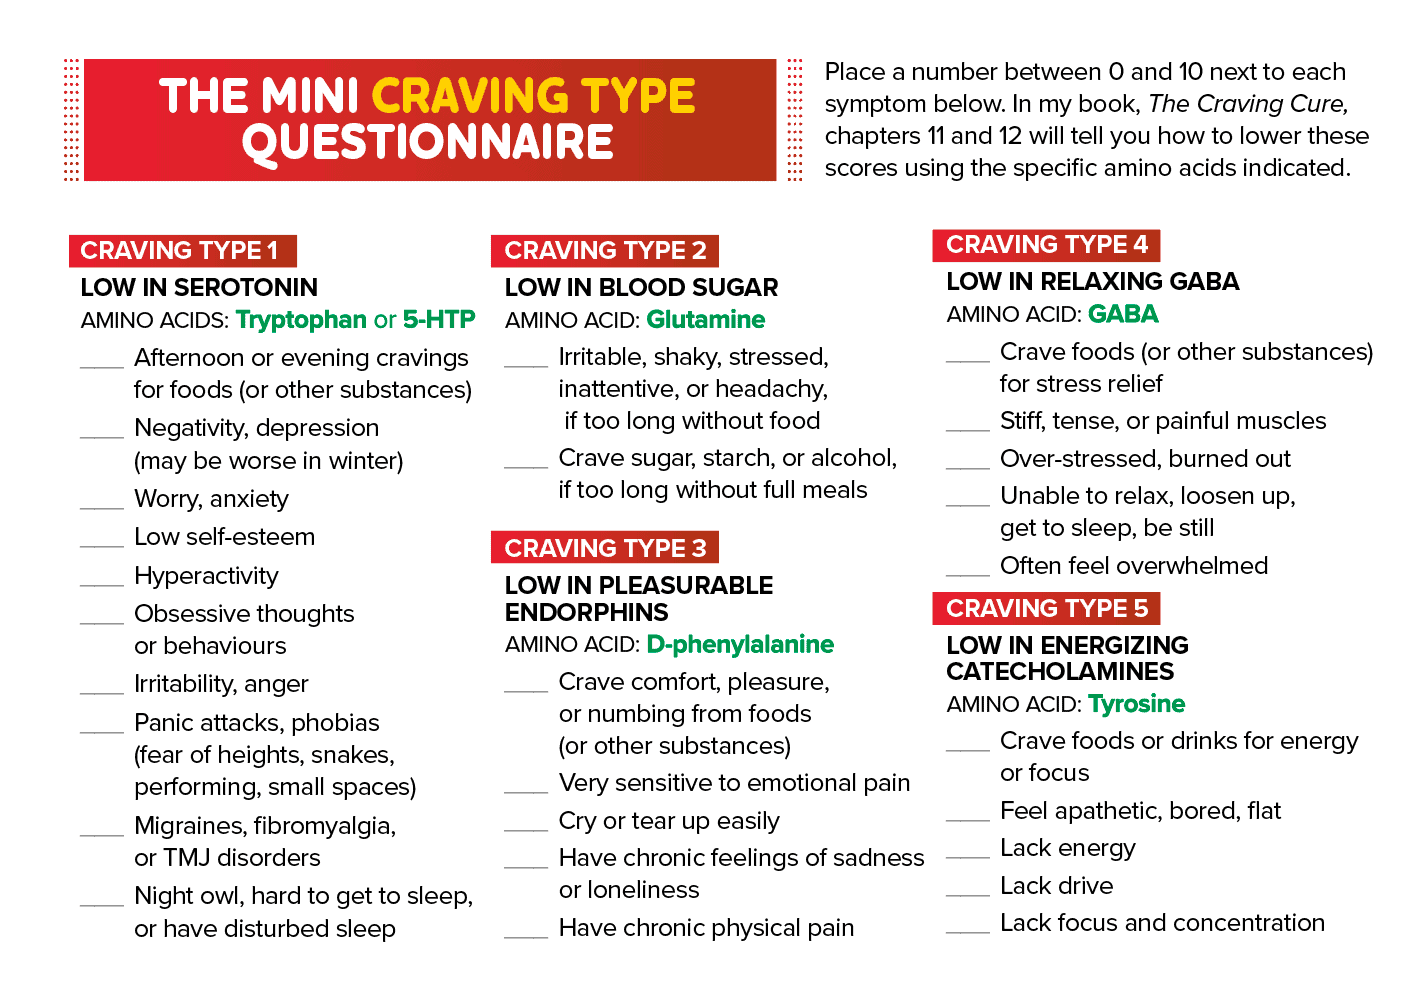 The mini craving type questionnaire